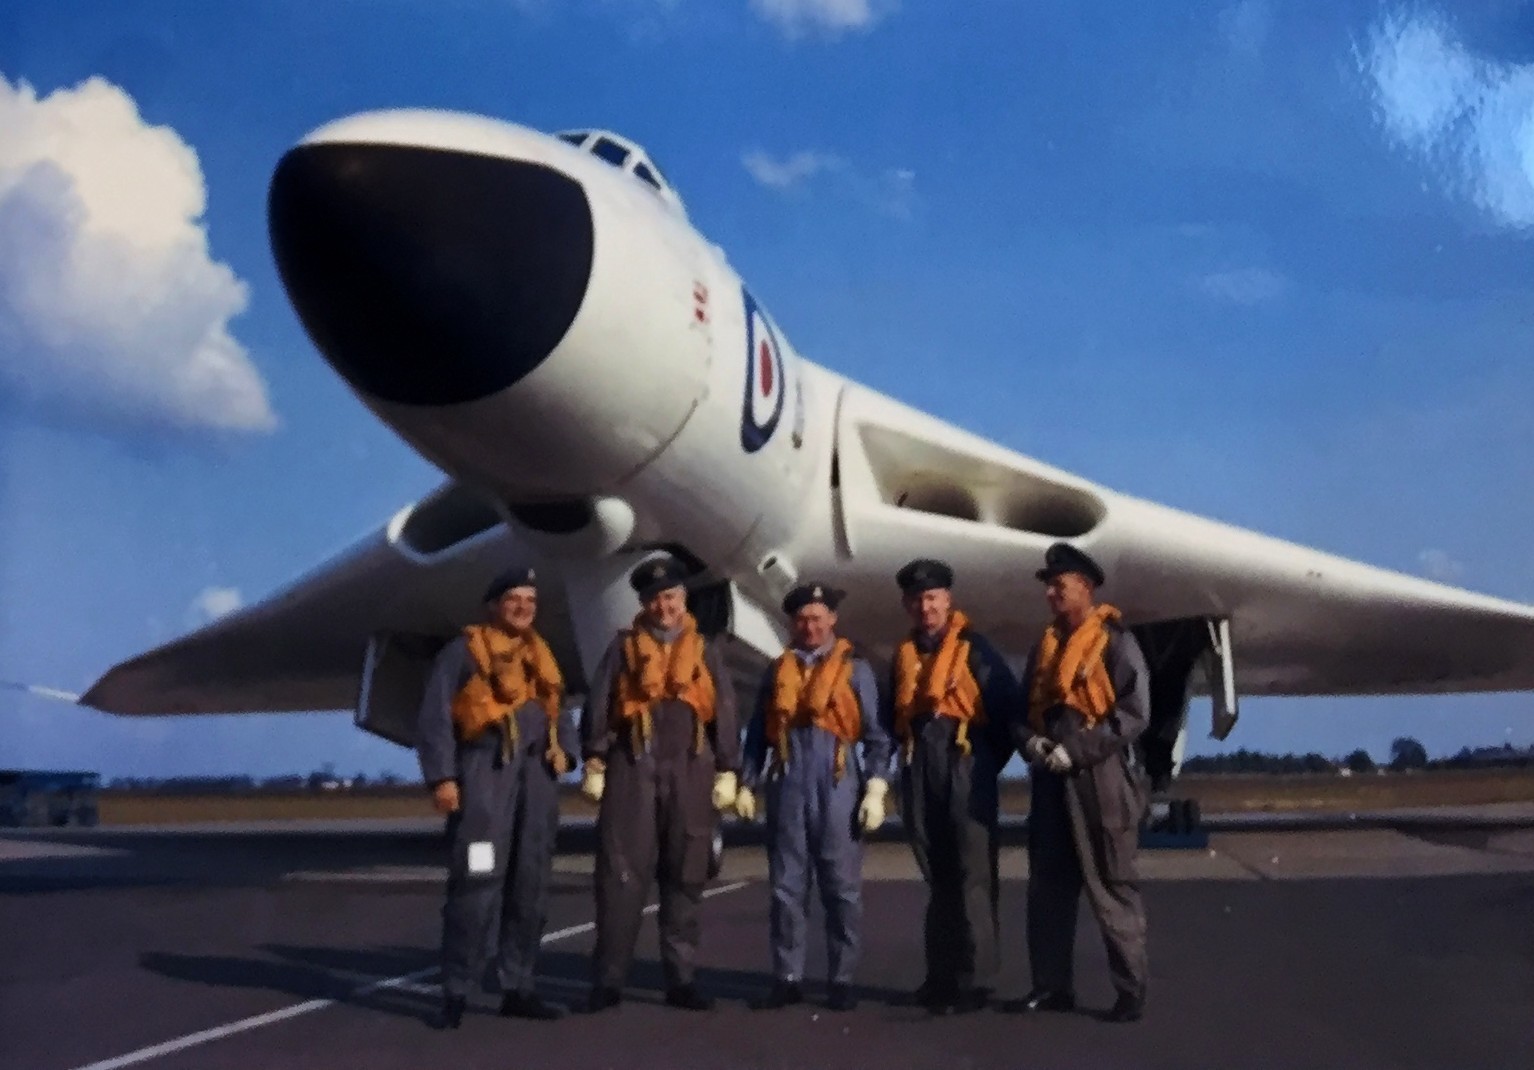 The Vulcan bomber and crew at RAF Middleton St George in the early 1960s